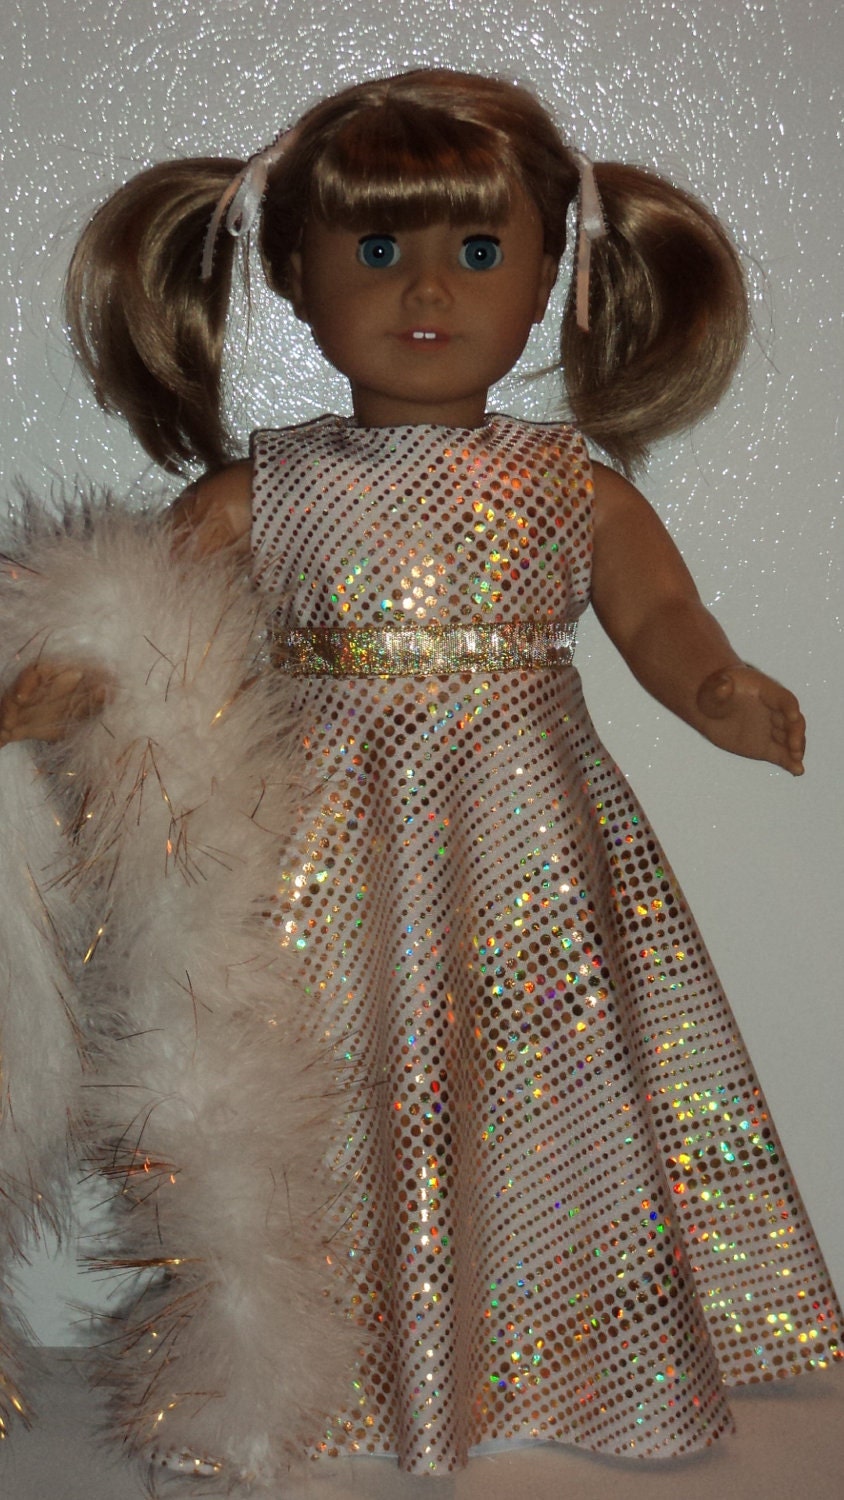 American Girl doll clothes - WhiteGold Gown and Boa